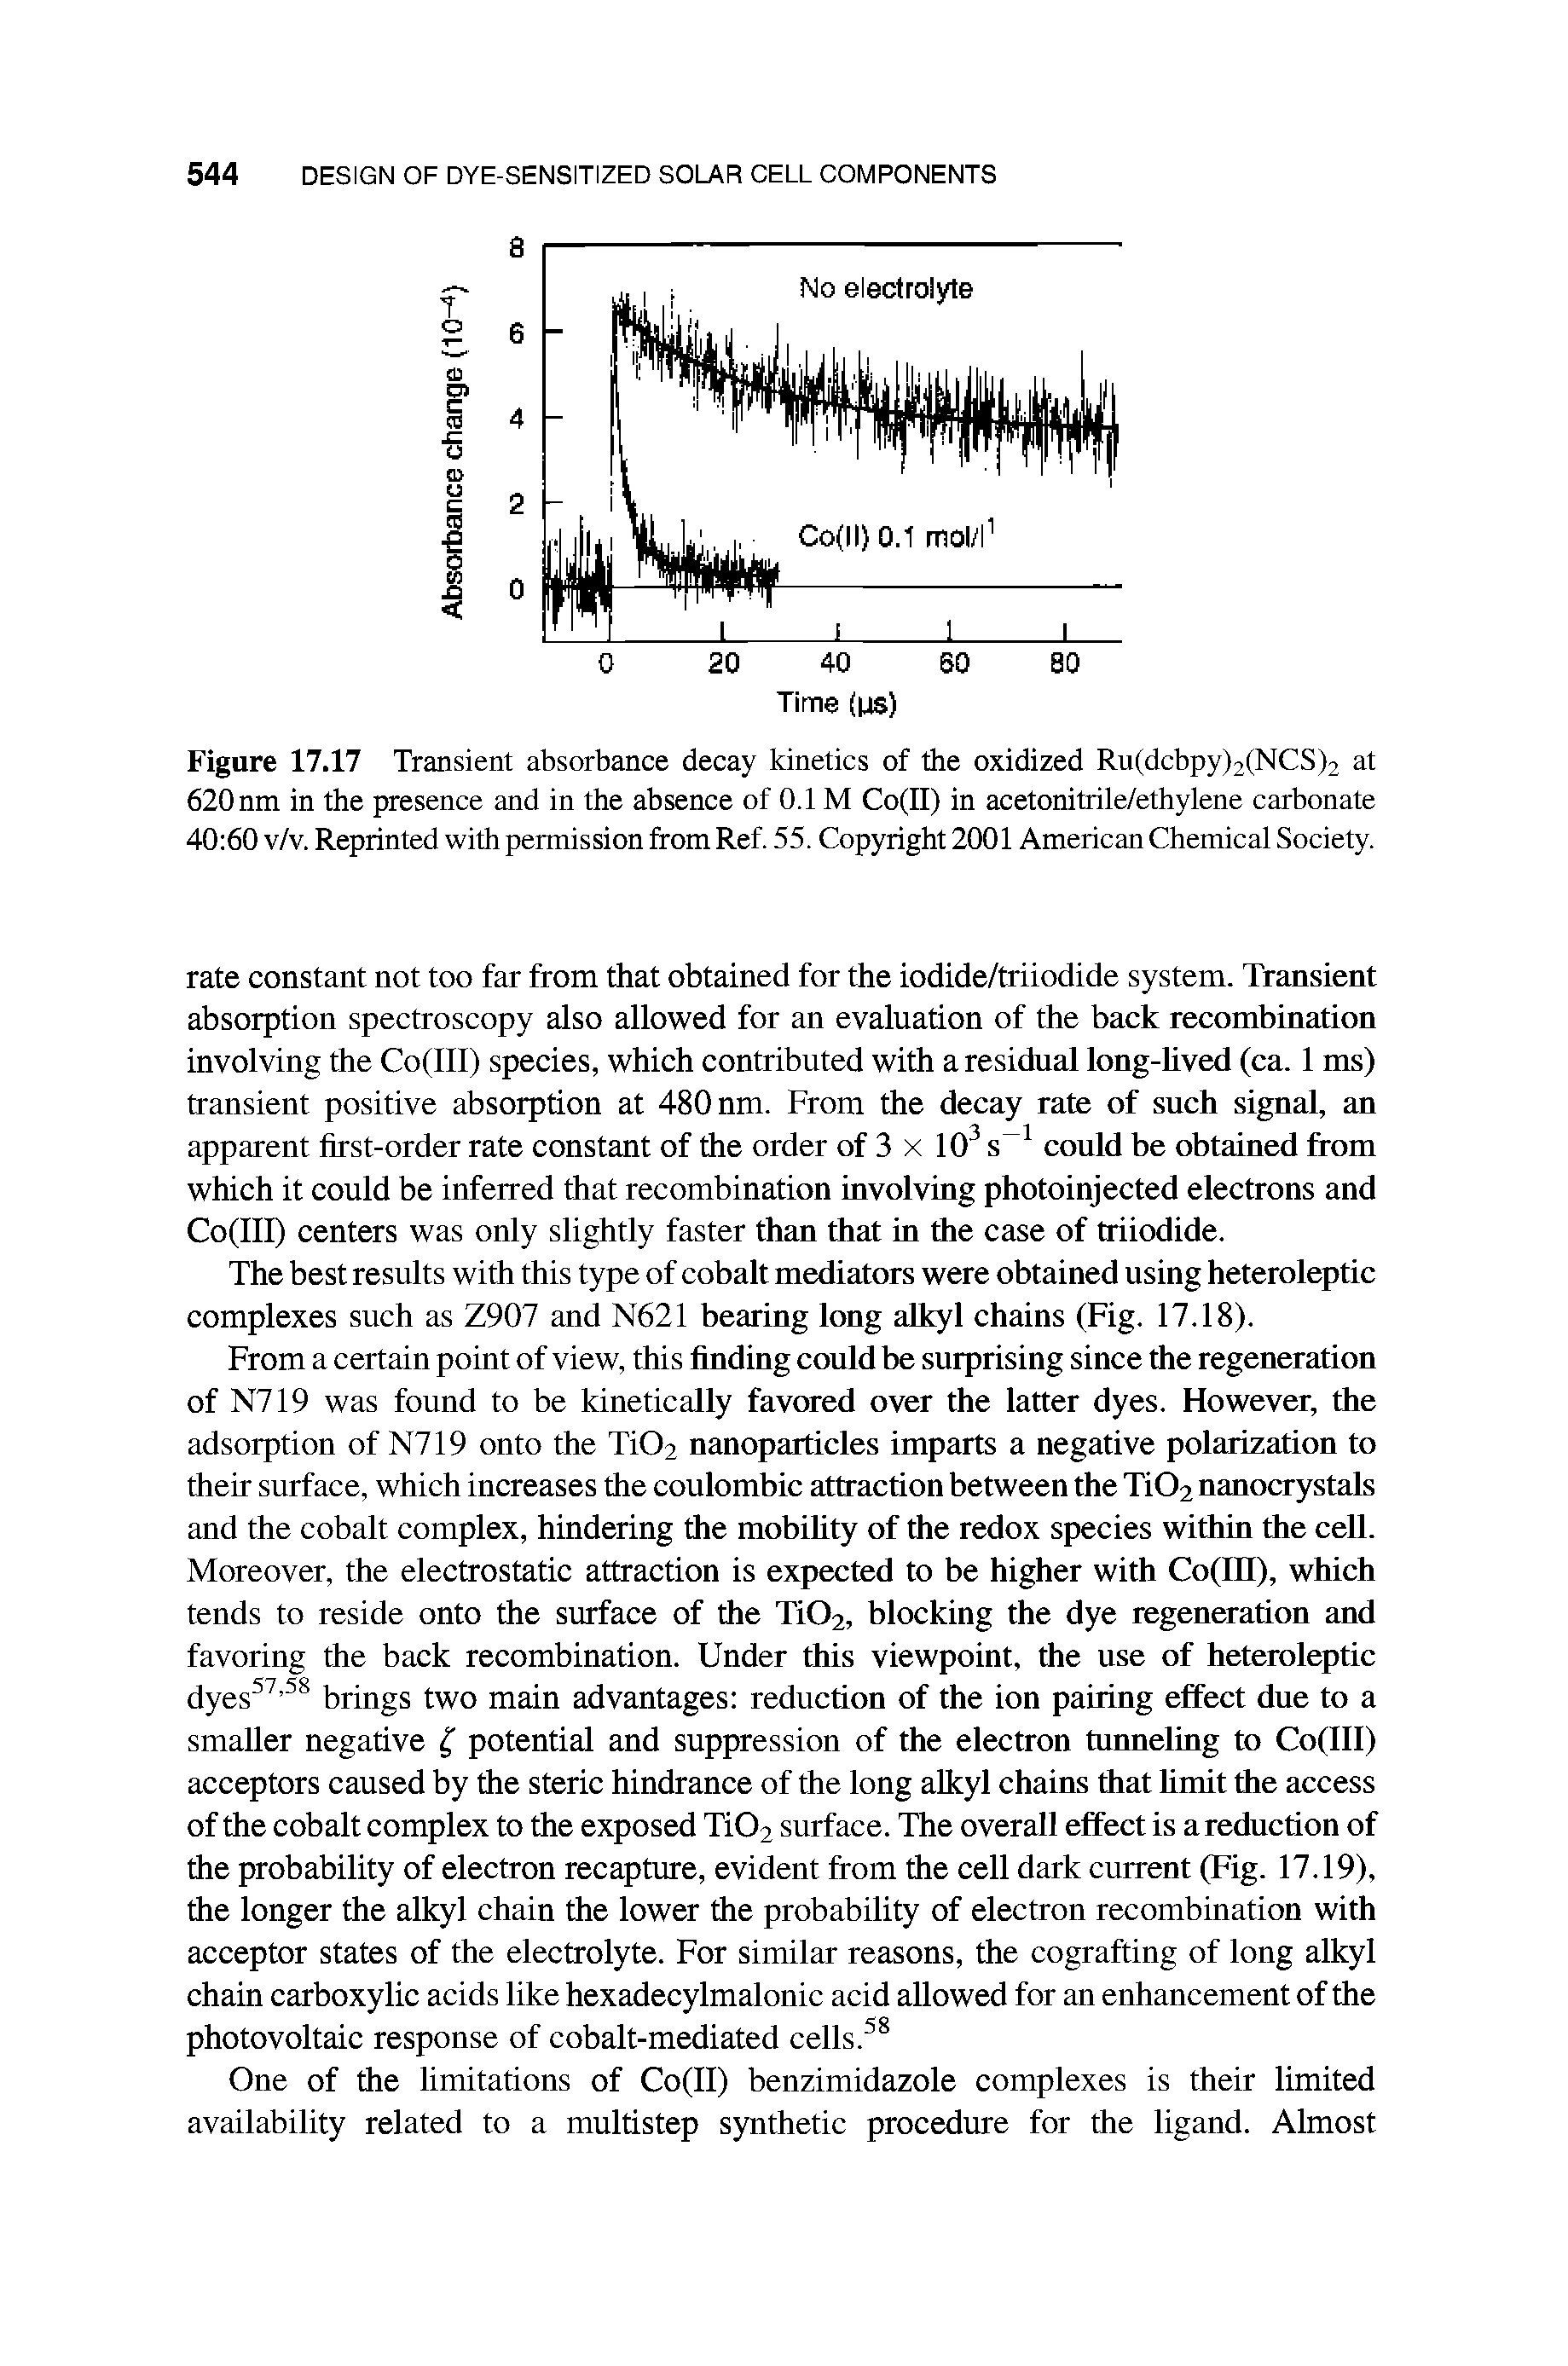 Figure 17.17 Transient absorbance decay kinetics of the oxidized Ru(dcbpy)2(NCS)2 at 620 nm in the presence and in the absence of 0.1 M Co(II) in acetonitrile/ethylene carbonate 40 60 v/v. Reprinted with permission from Ref. 55. Copyright 2001 American Chemical Society.